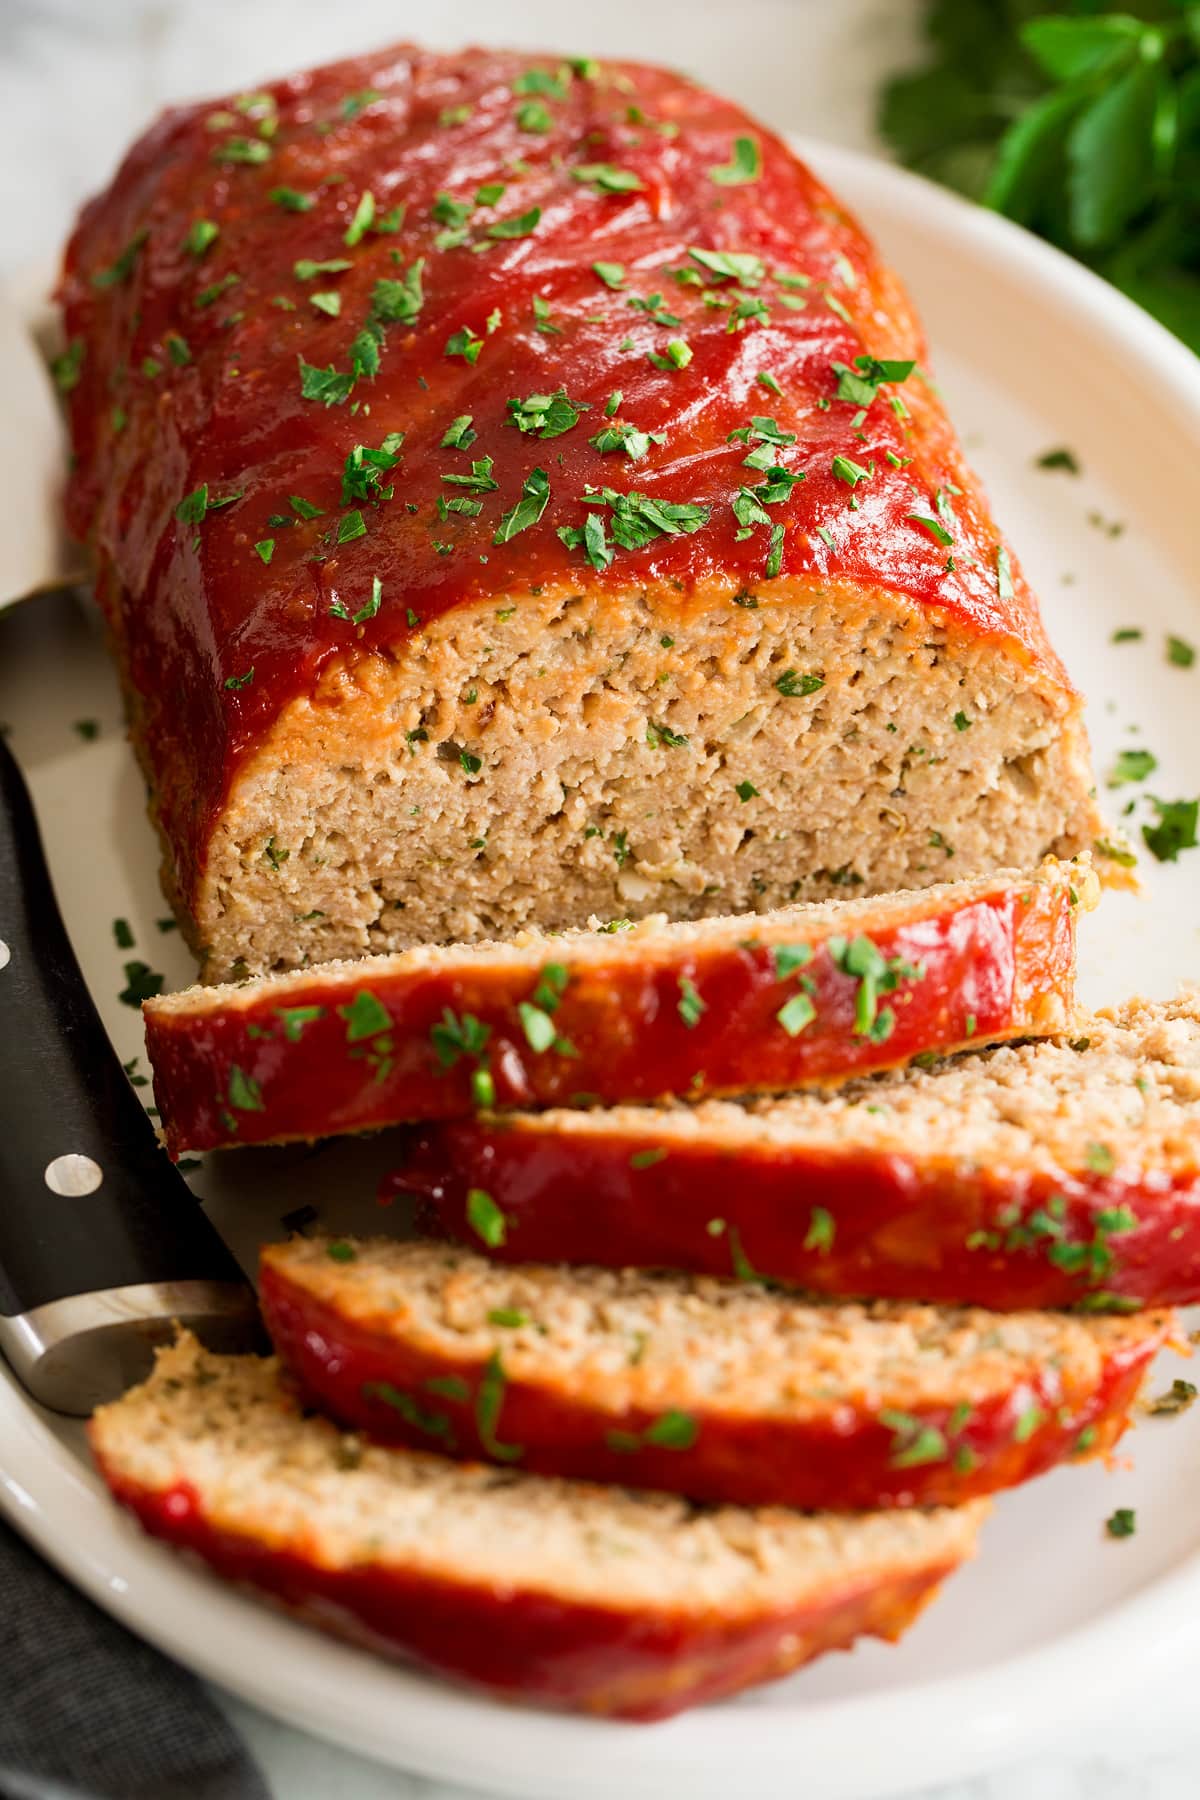 Close up photo of turkey meatloaf with several slices cut. Shown from a side angle.